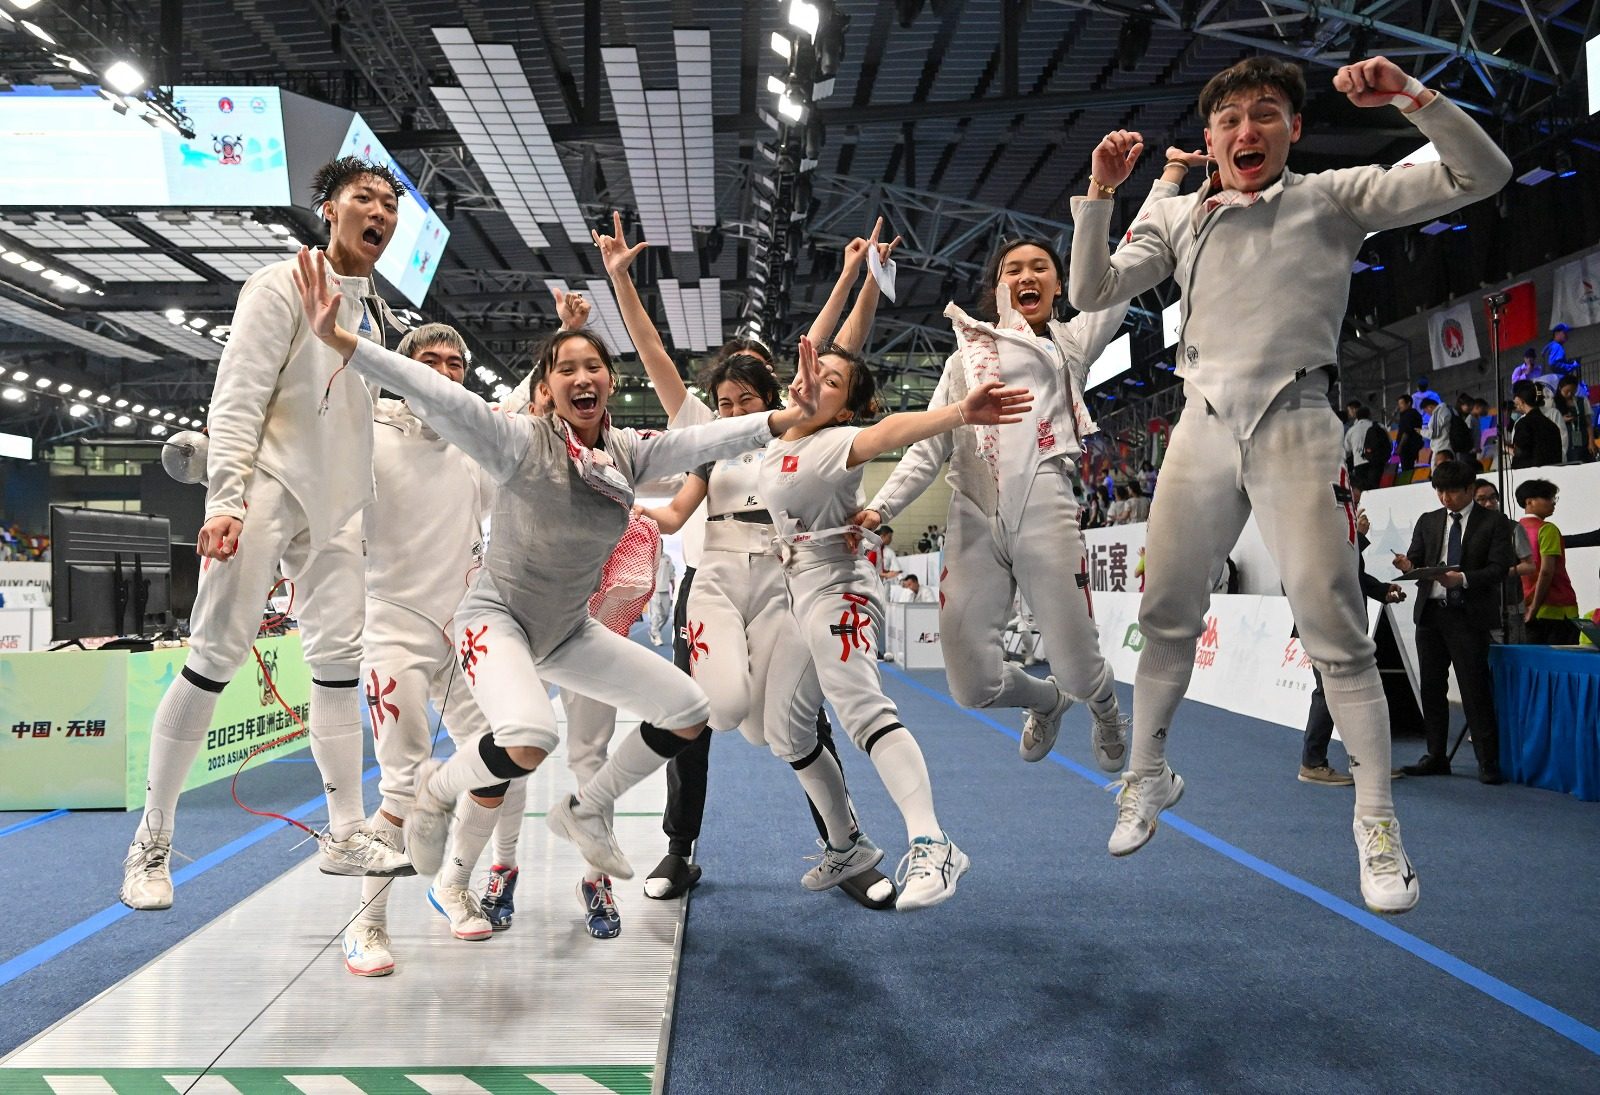 Hong Kong’s men’s epee and women’s foil teams celebrate after capturing bronze medals at the Asian Championships in Wuxi, China. Photo: Hong Kong Fencing Association